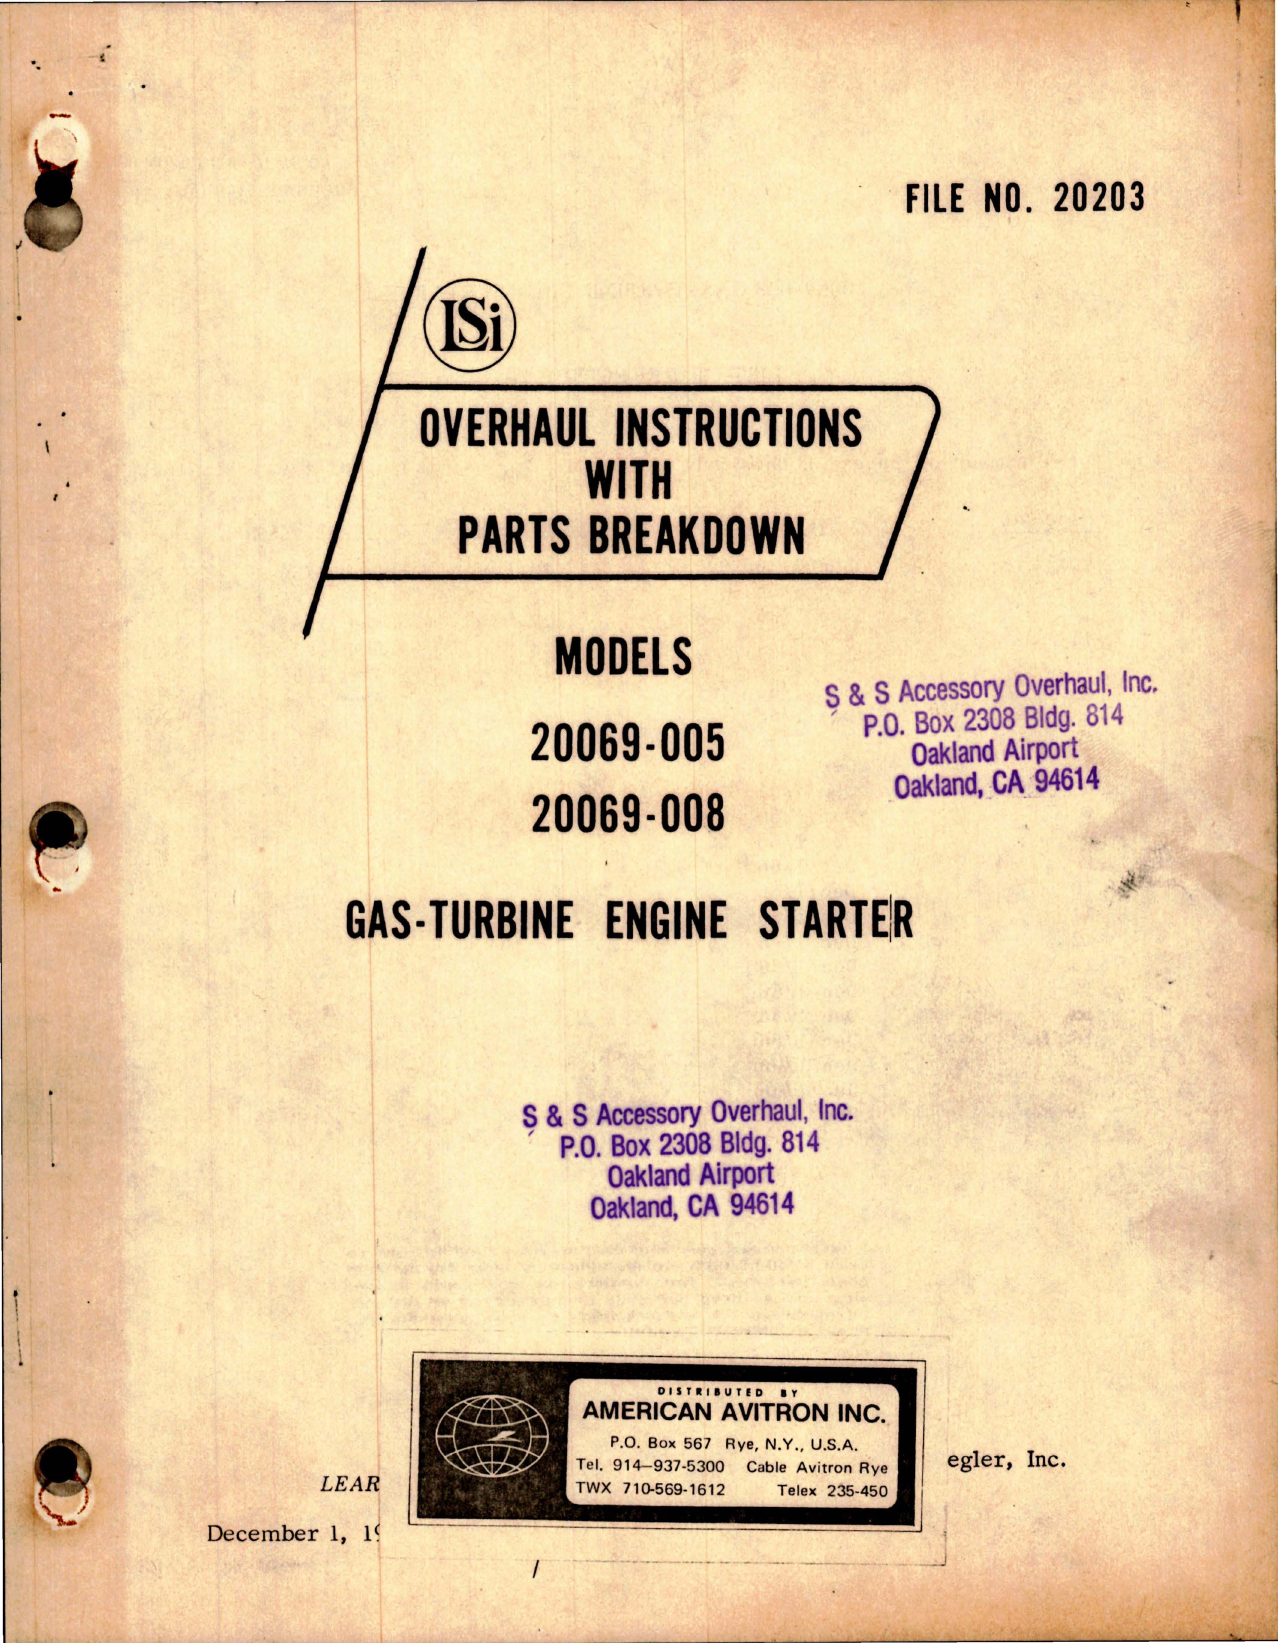 Sample page 1 from AirCorps Library document: Overhaul Instructions with Parts Breakdown for Gas-Turbine Engine Starter - Models 20069-005, 20069-008 